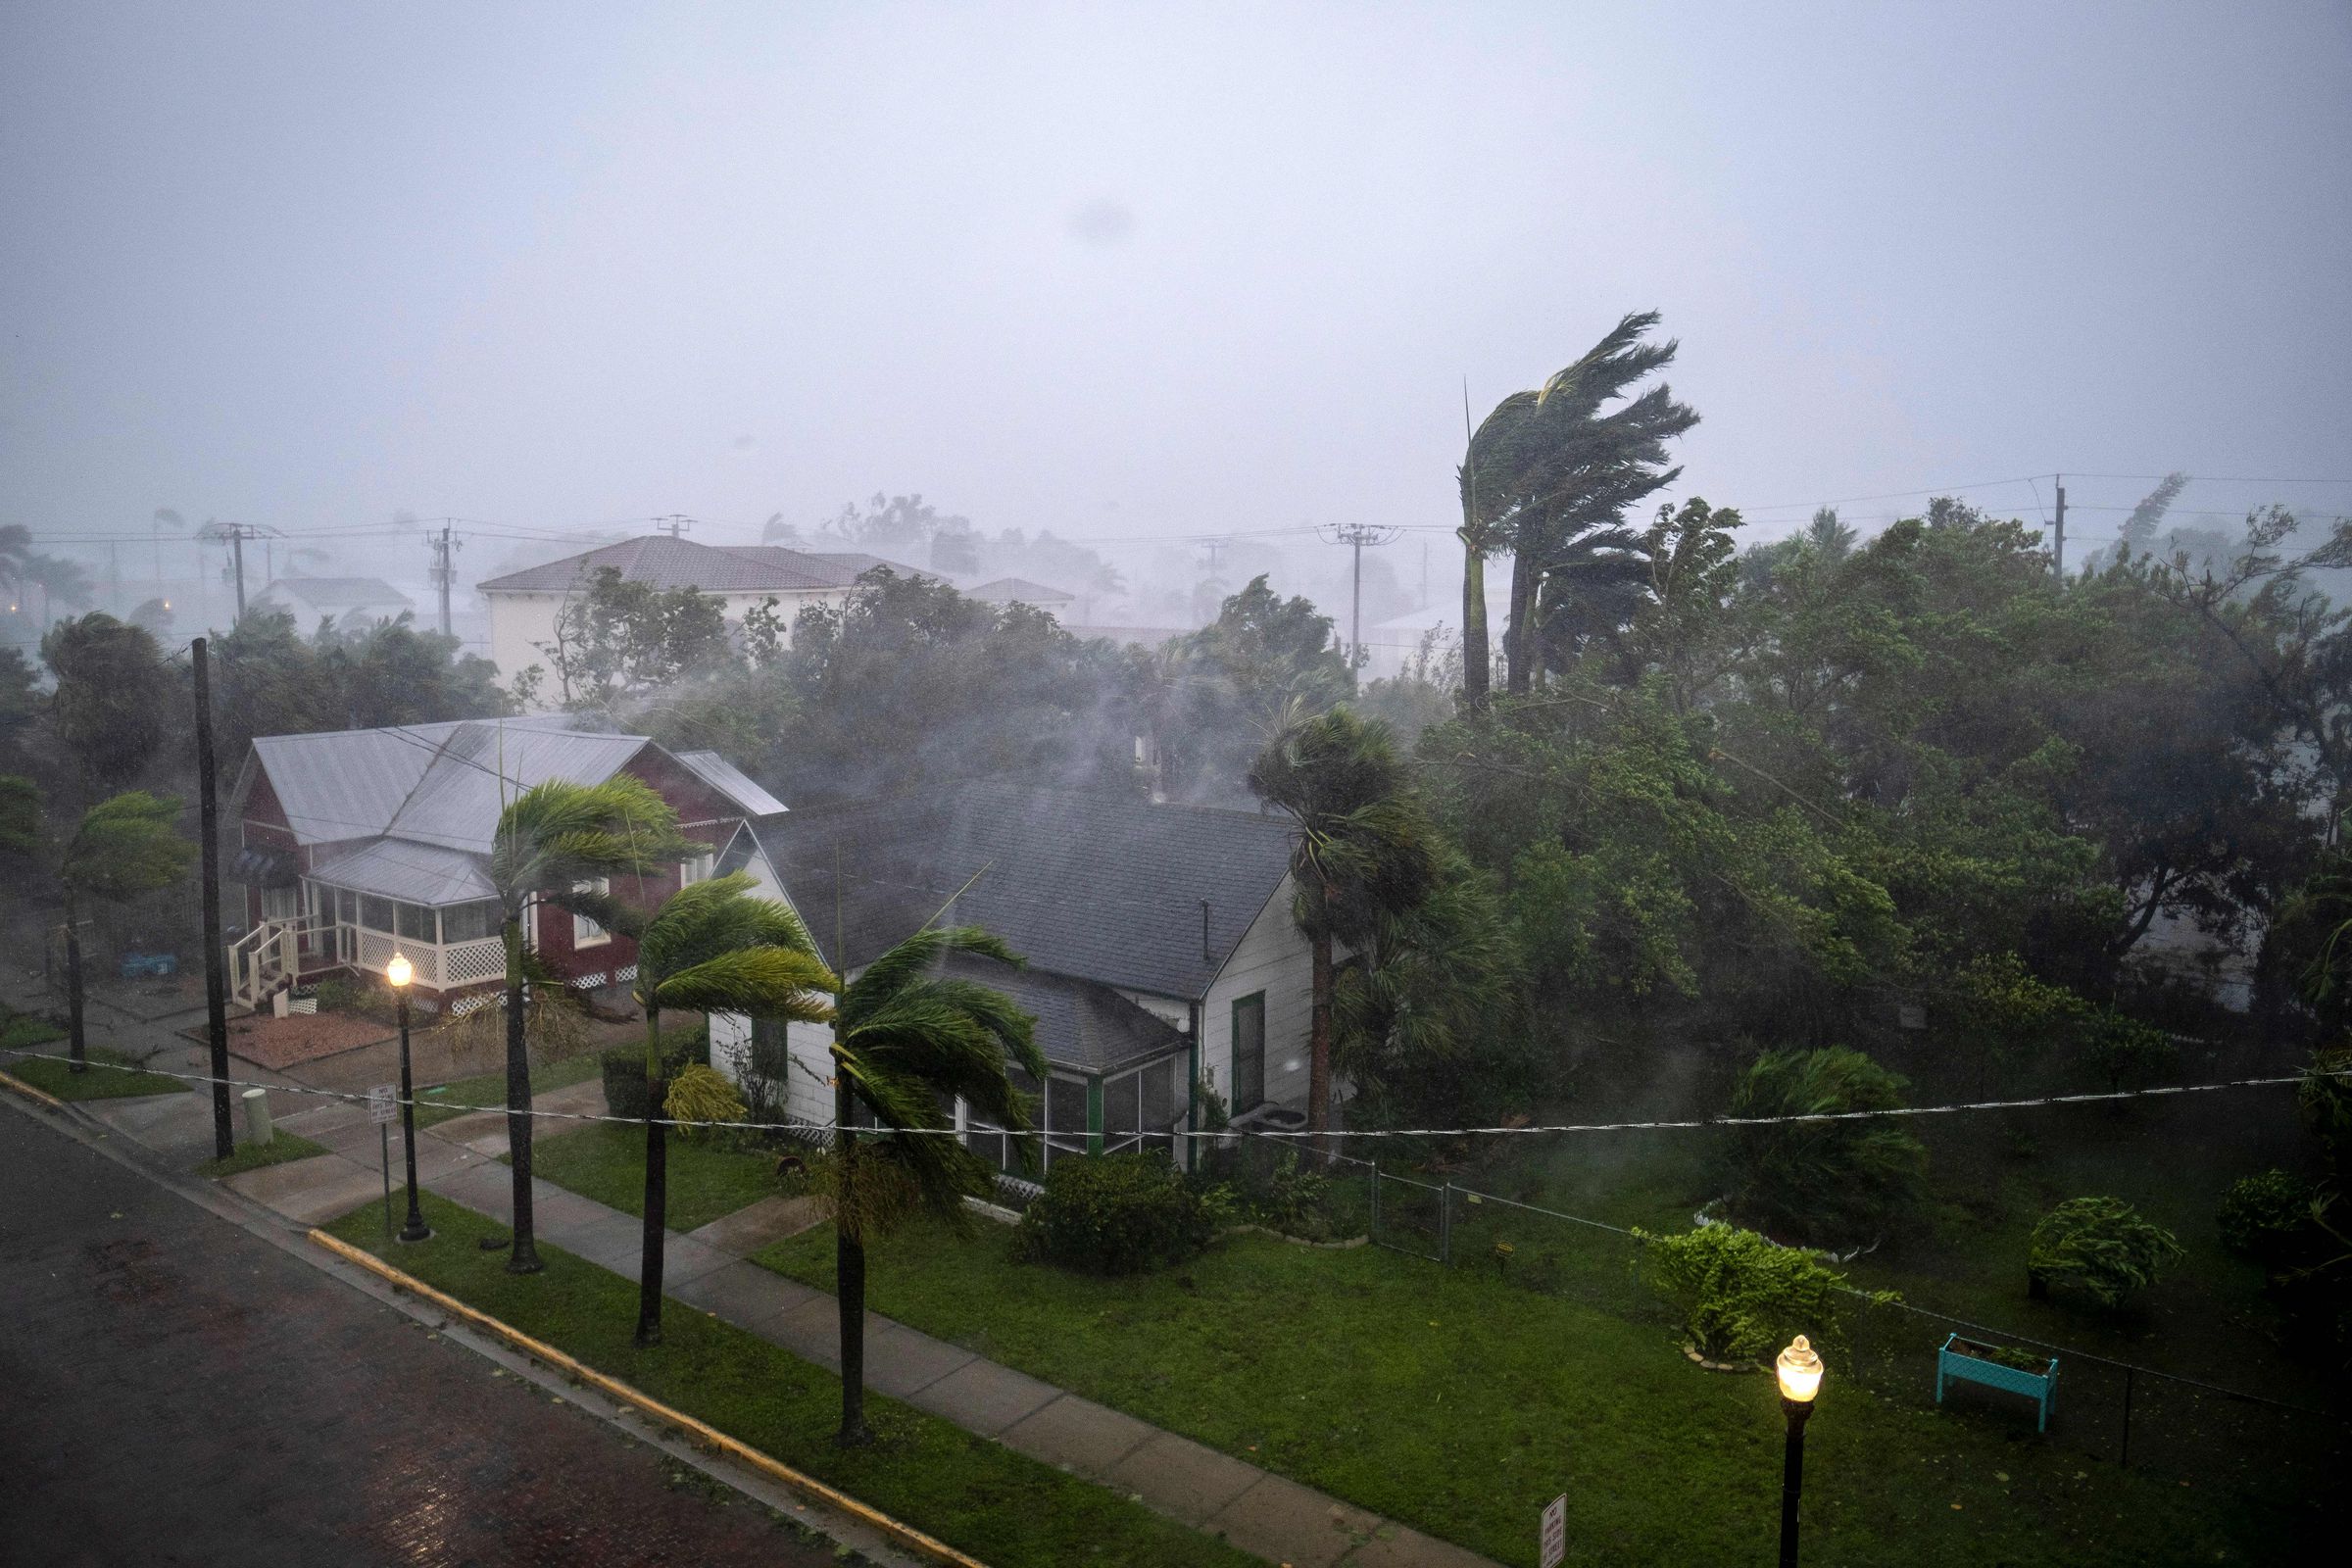 A topshot of palm trees blowing in the wind above homes in a dark storm.